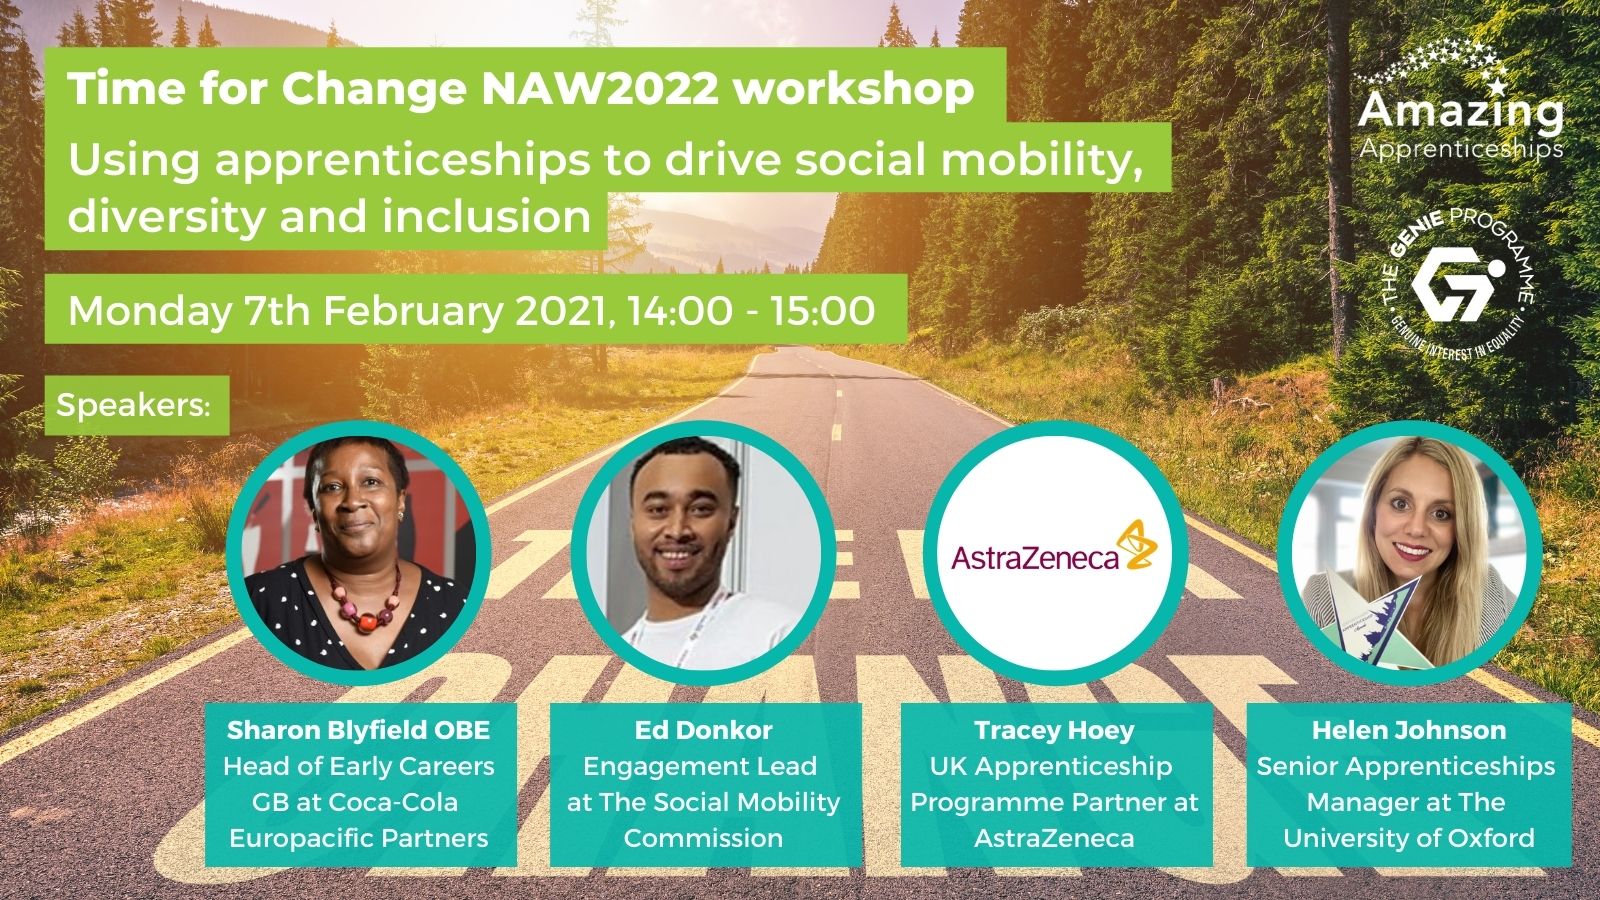 Time for Change: Using apprenticeships to drive social mobility workshop recording